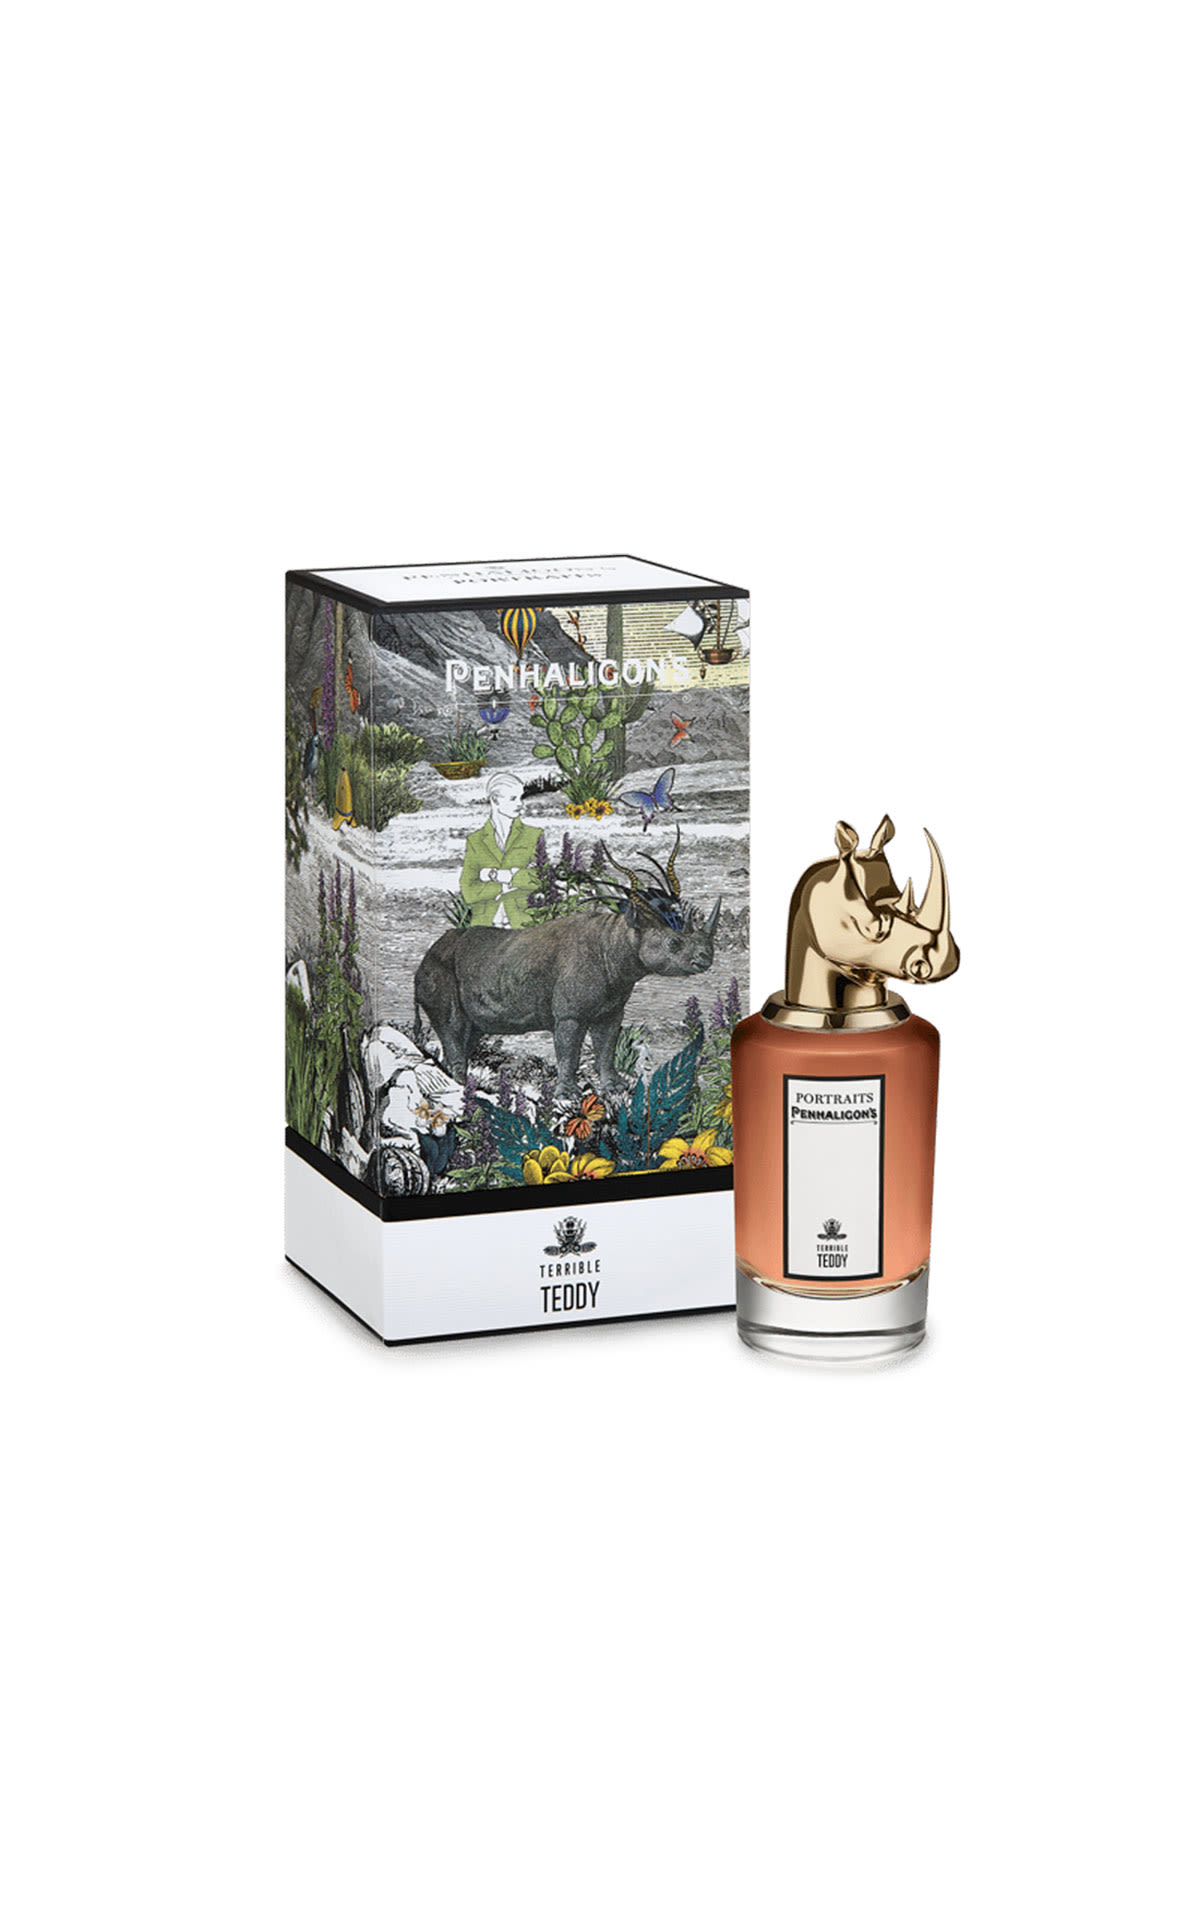 Penhaligon's Terrible tebby from Bicester Village